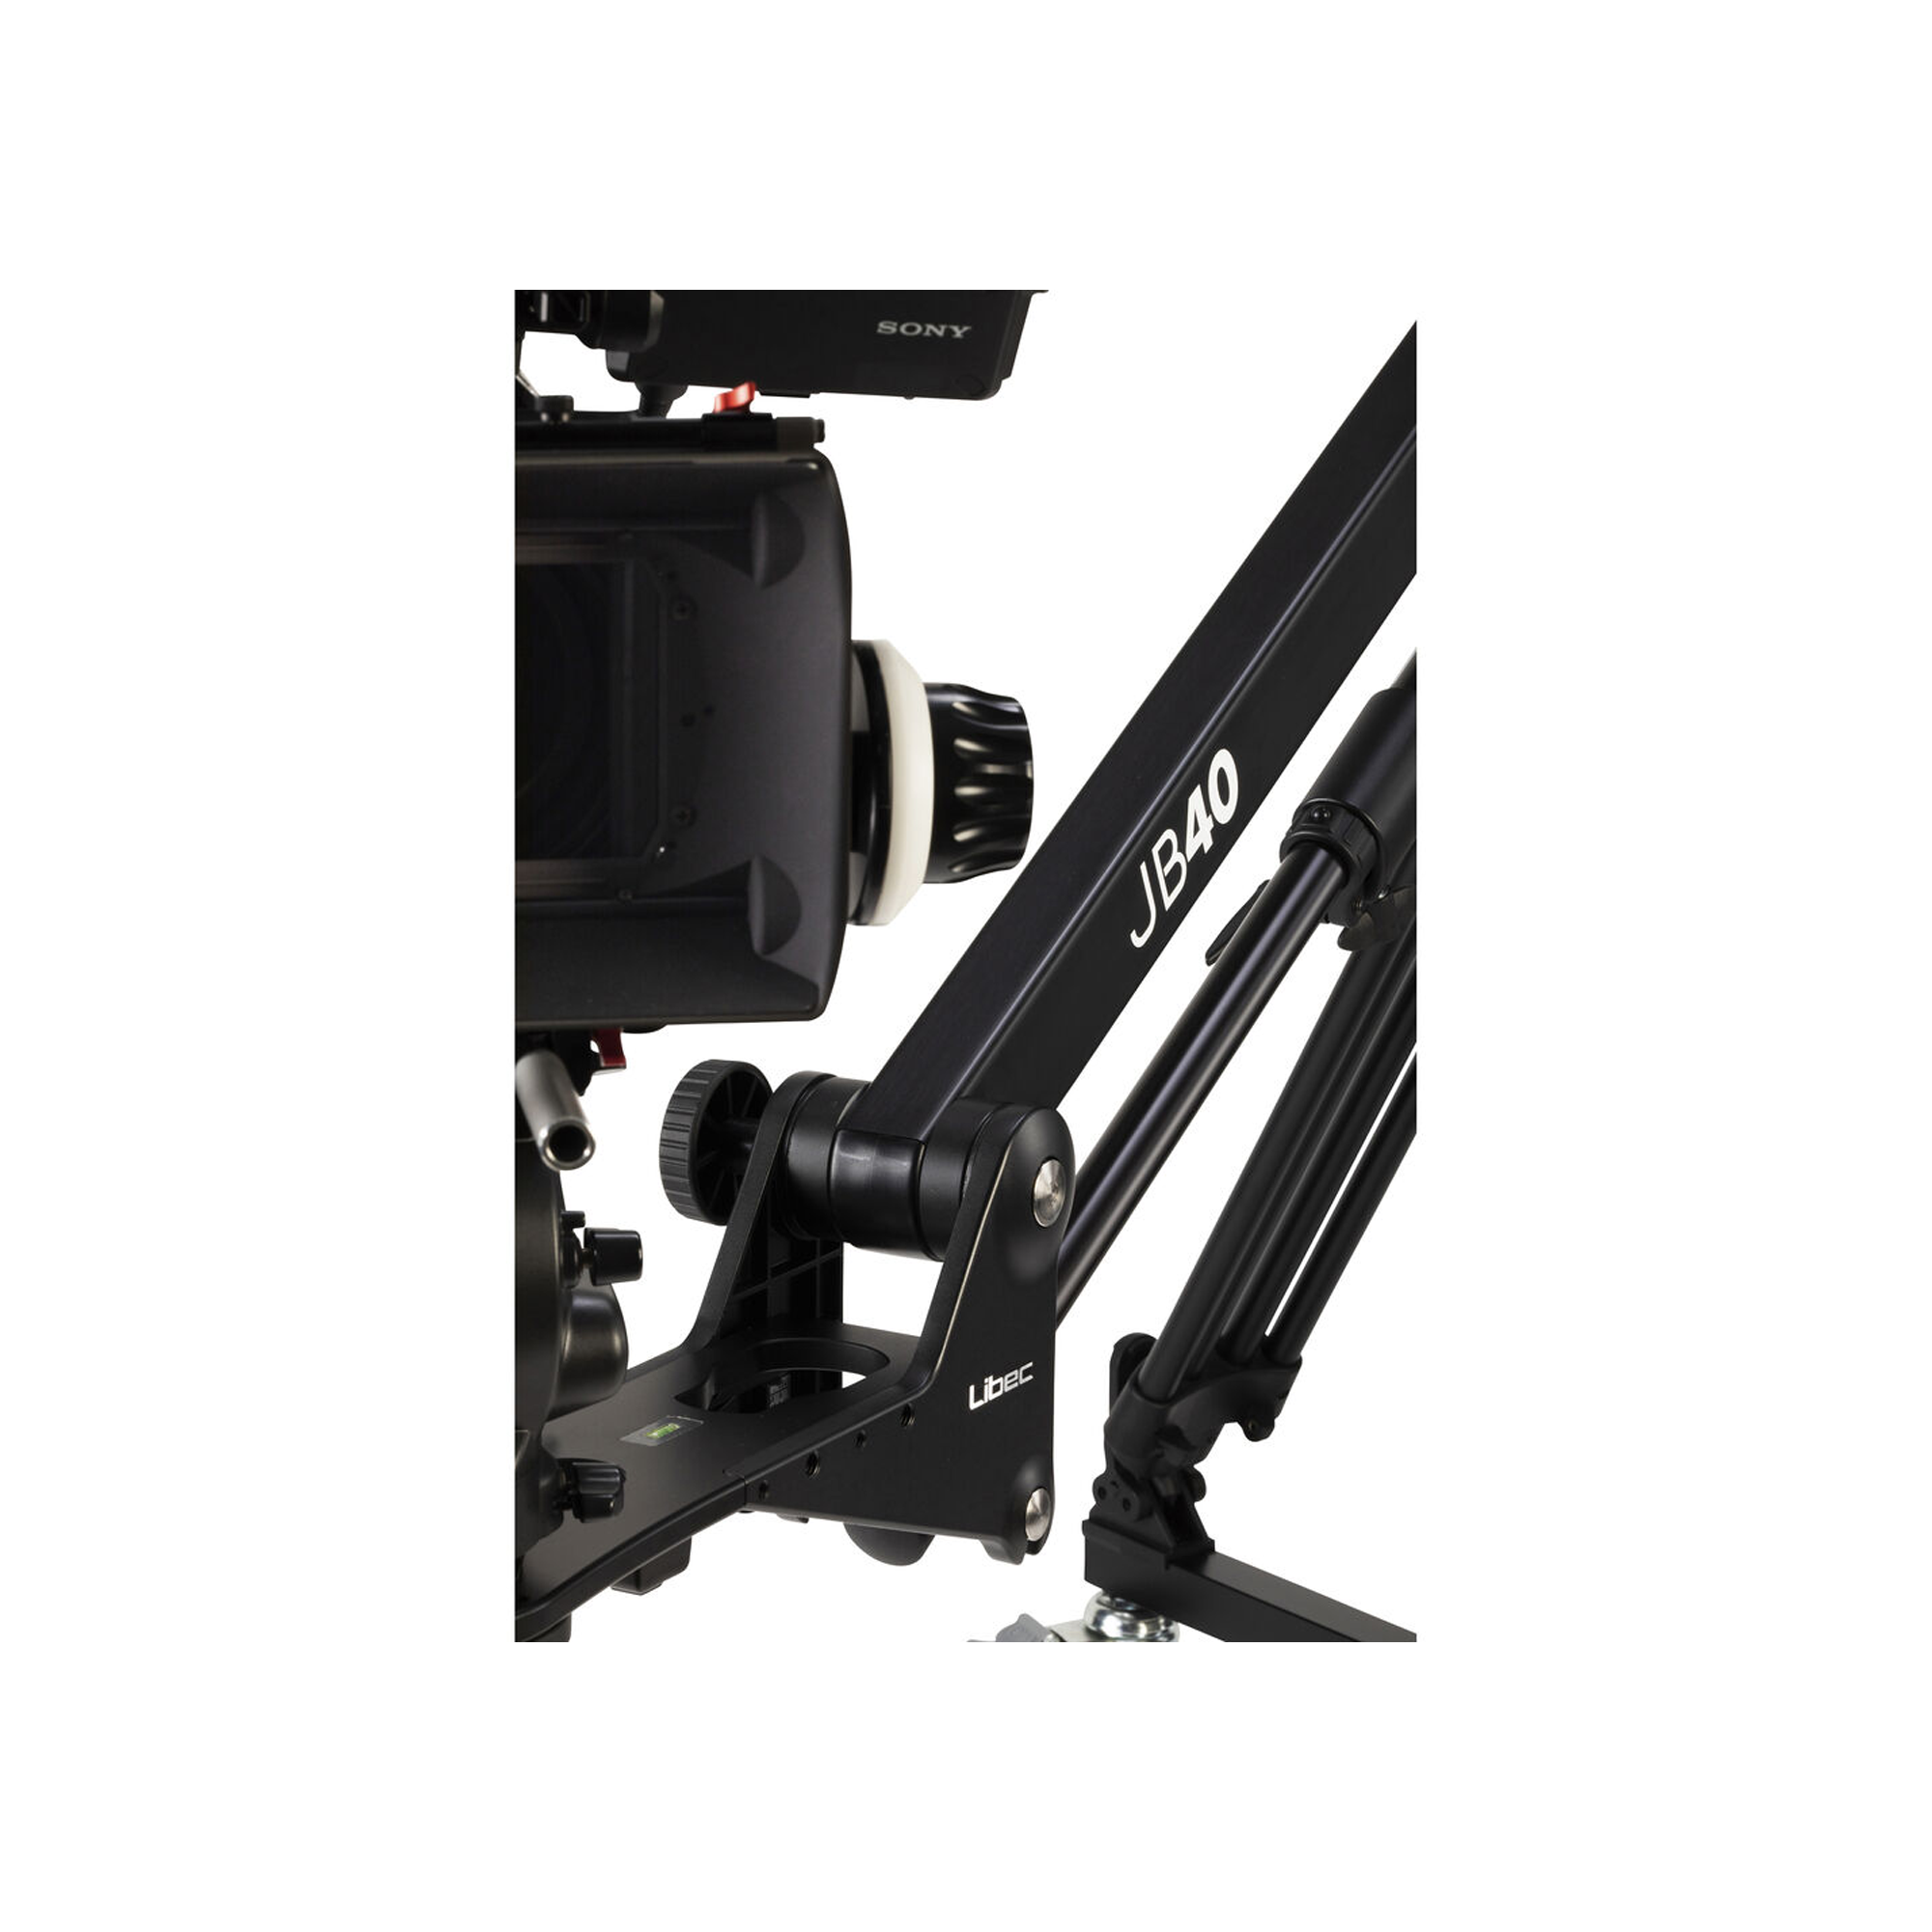 Libec Jib arm with carrying case